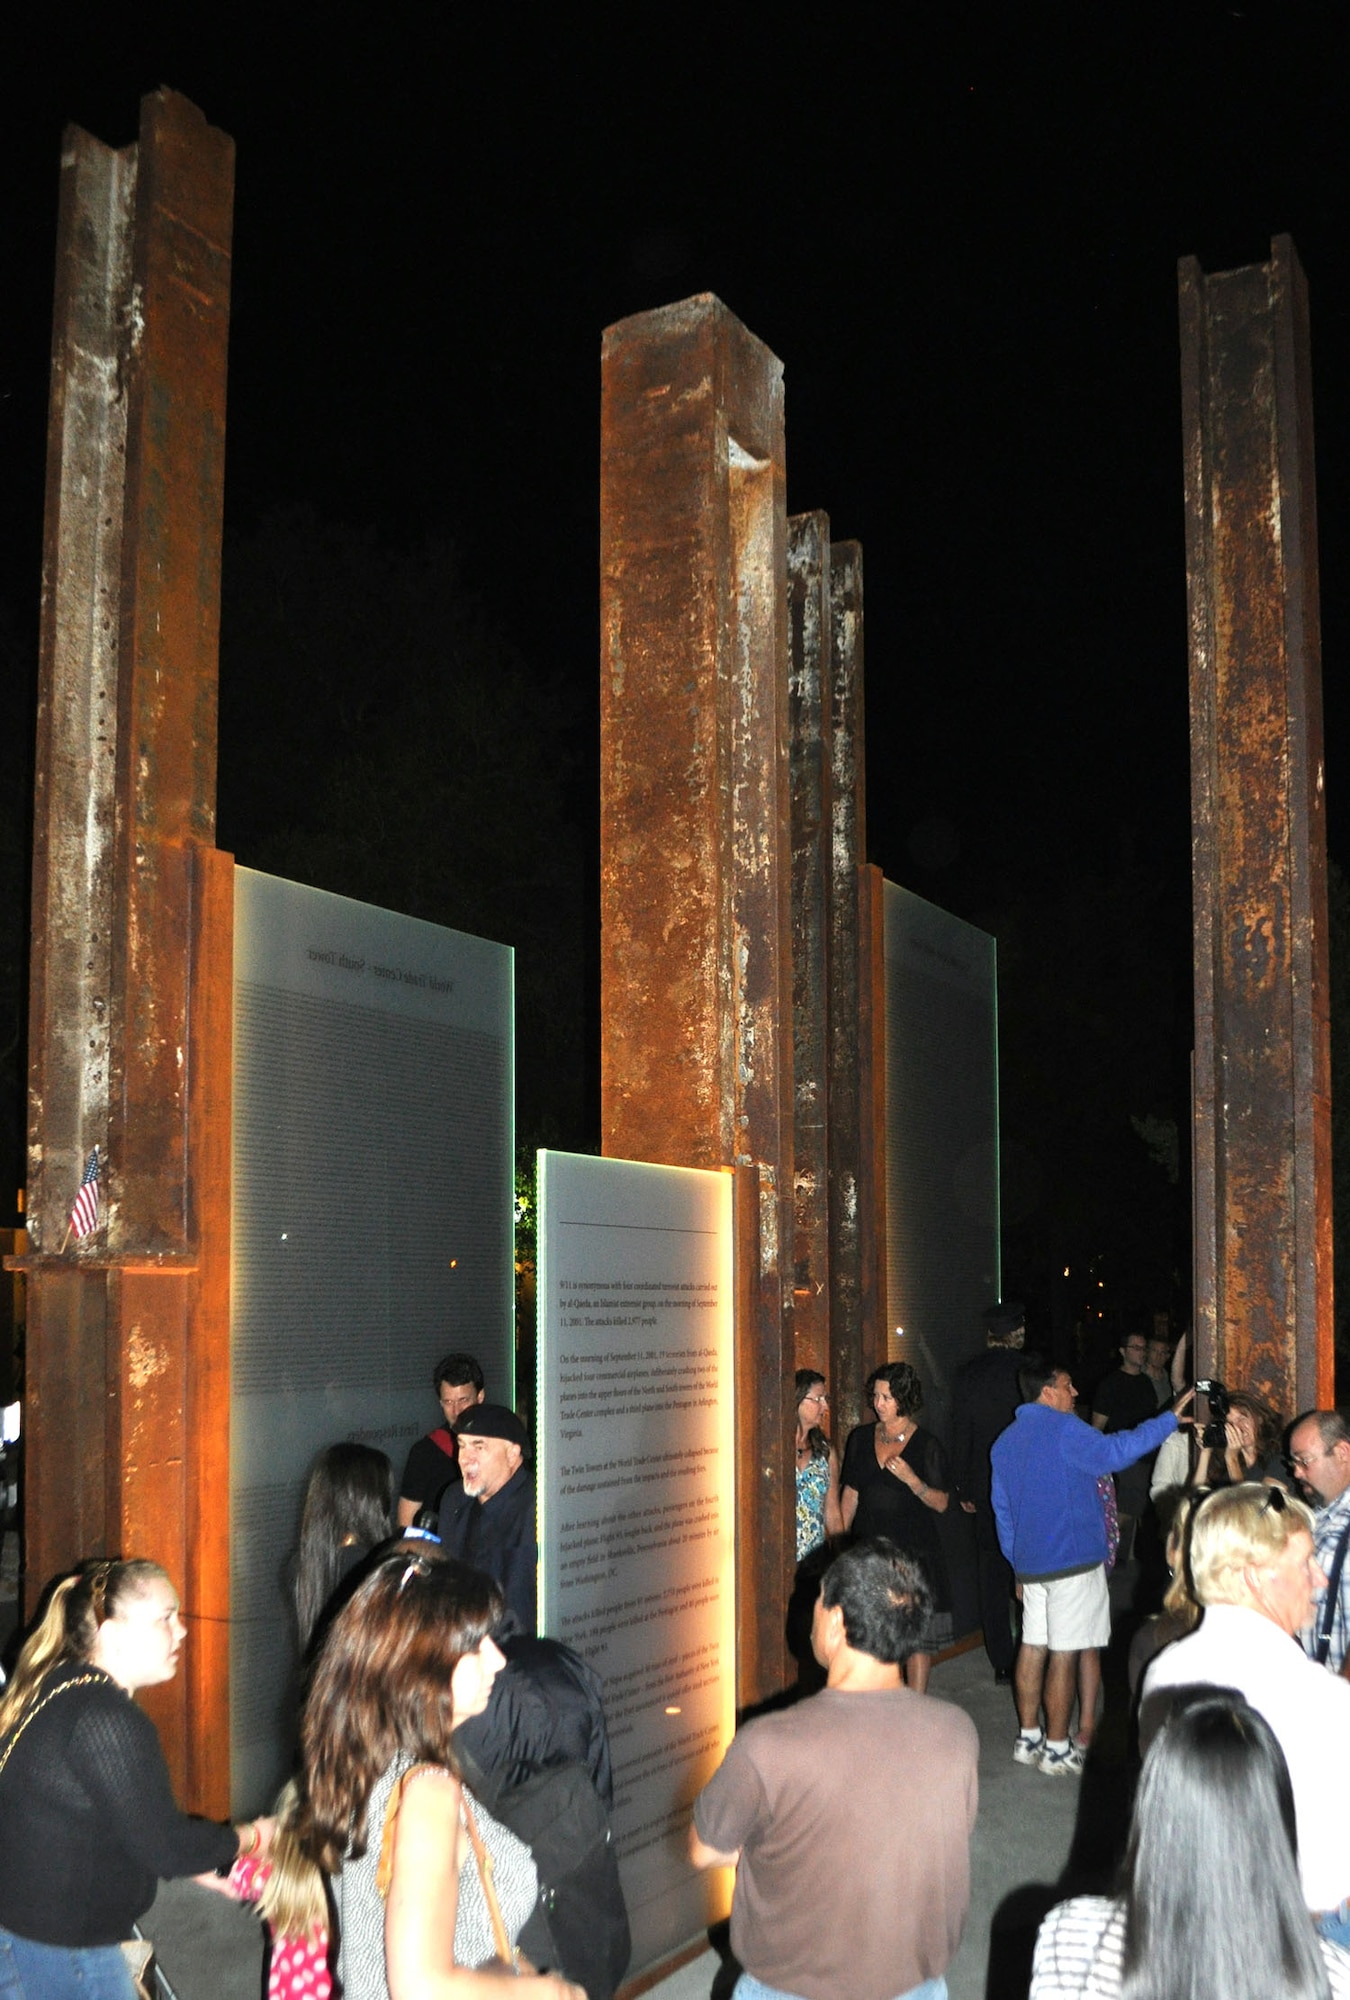 TRAVIS AIR FORCE BASE, Calif. -- The newly dedicated Napa 9-11 Memorial Garden. The names of each victim of the 2001 terrorist attacks on the World Trade Center and the Pentagon, are etched on the four glass panels that anchor the center of the sculpture, which includes four steel beams from the Twin Towers. (U.S. Air Force photo/Ellen Hatfield)